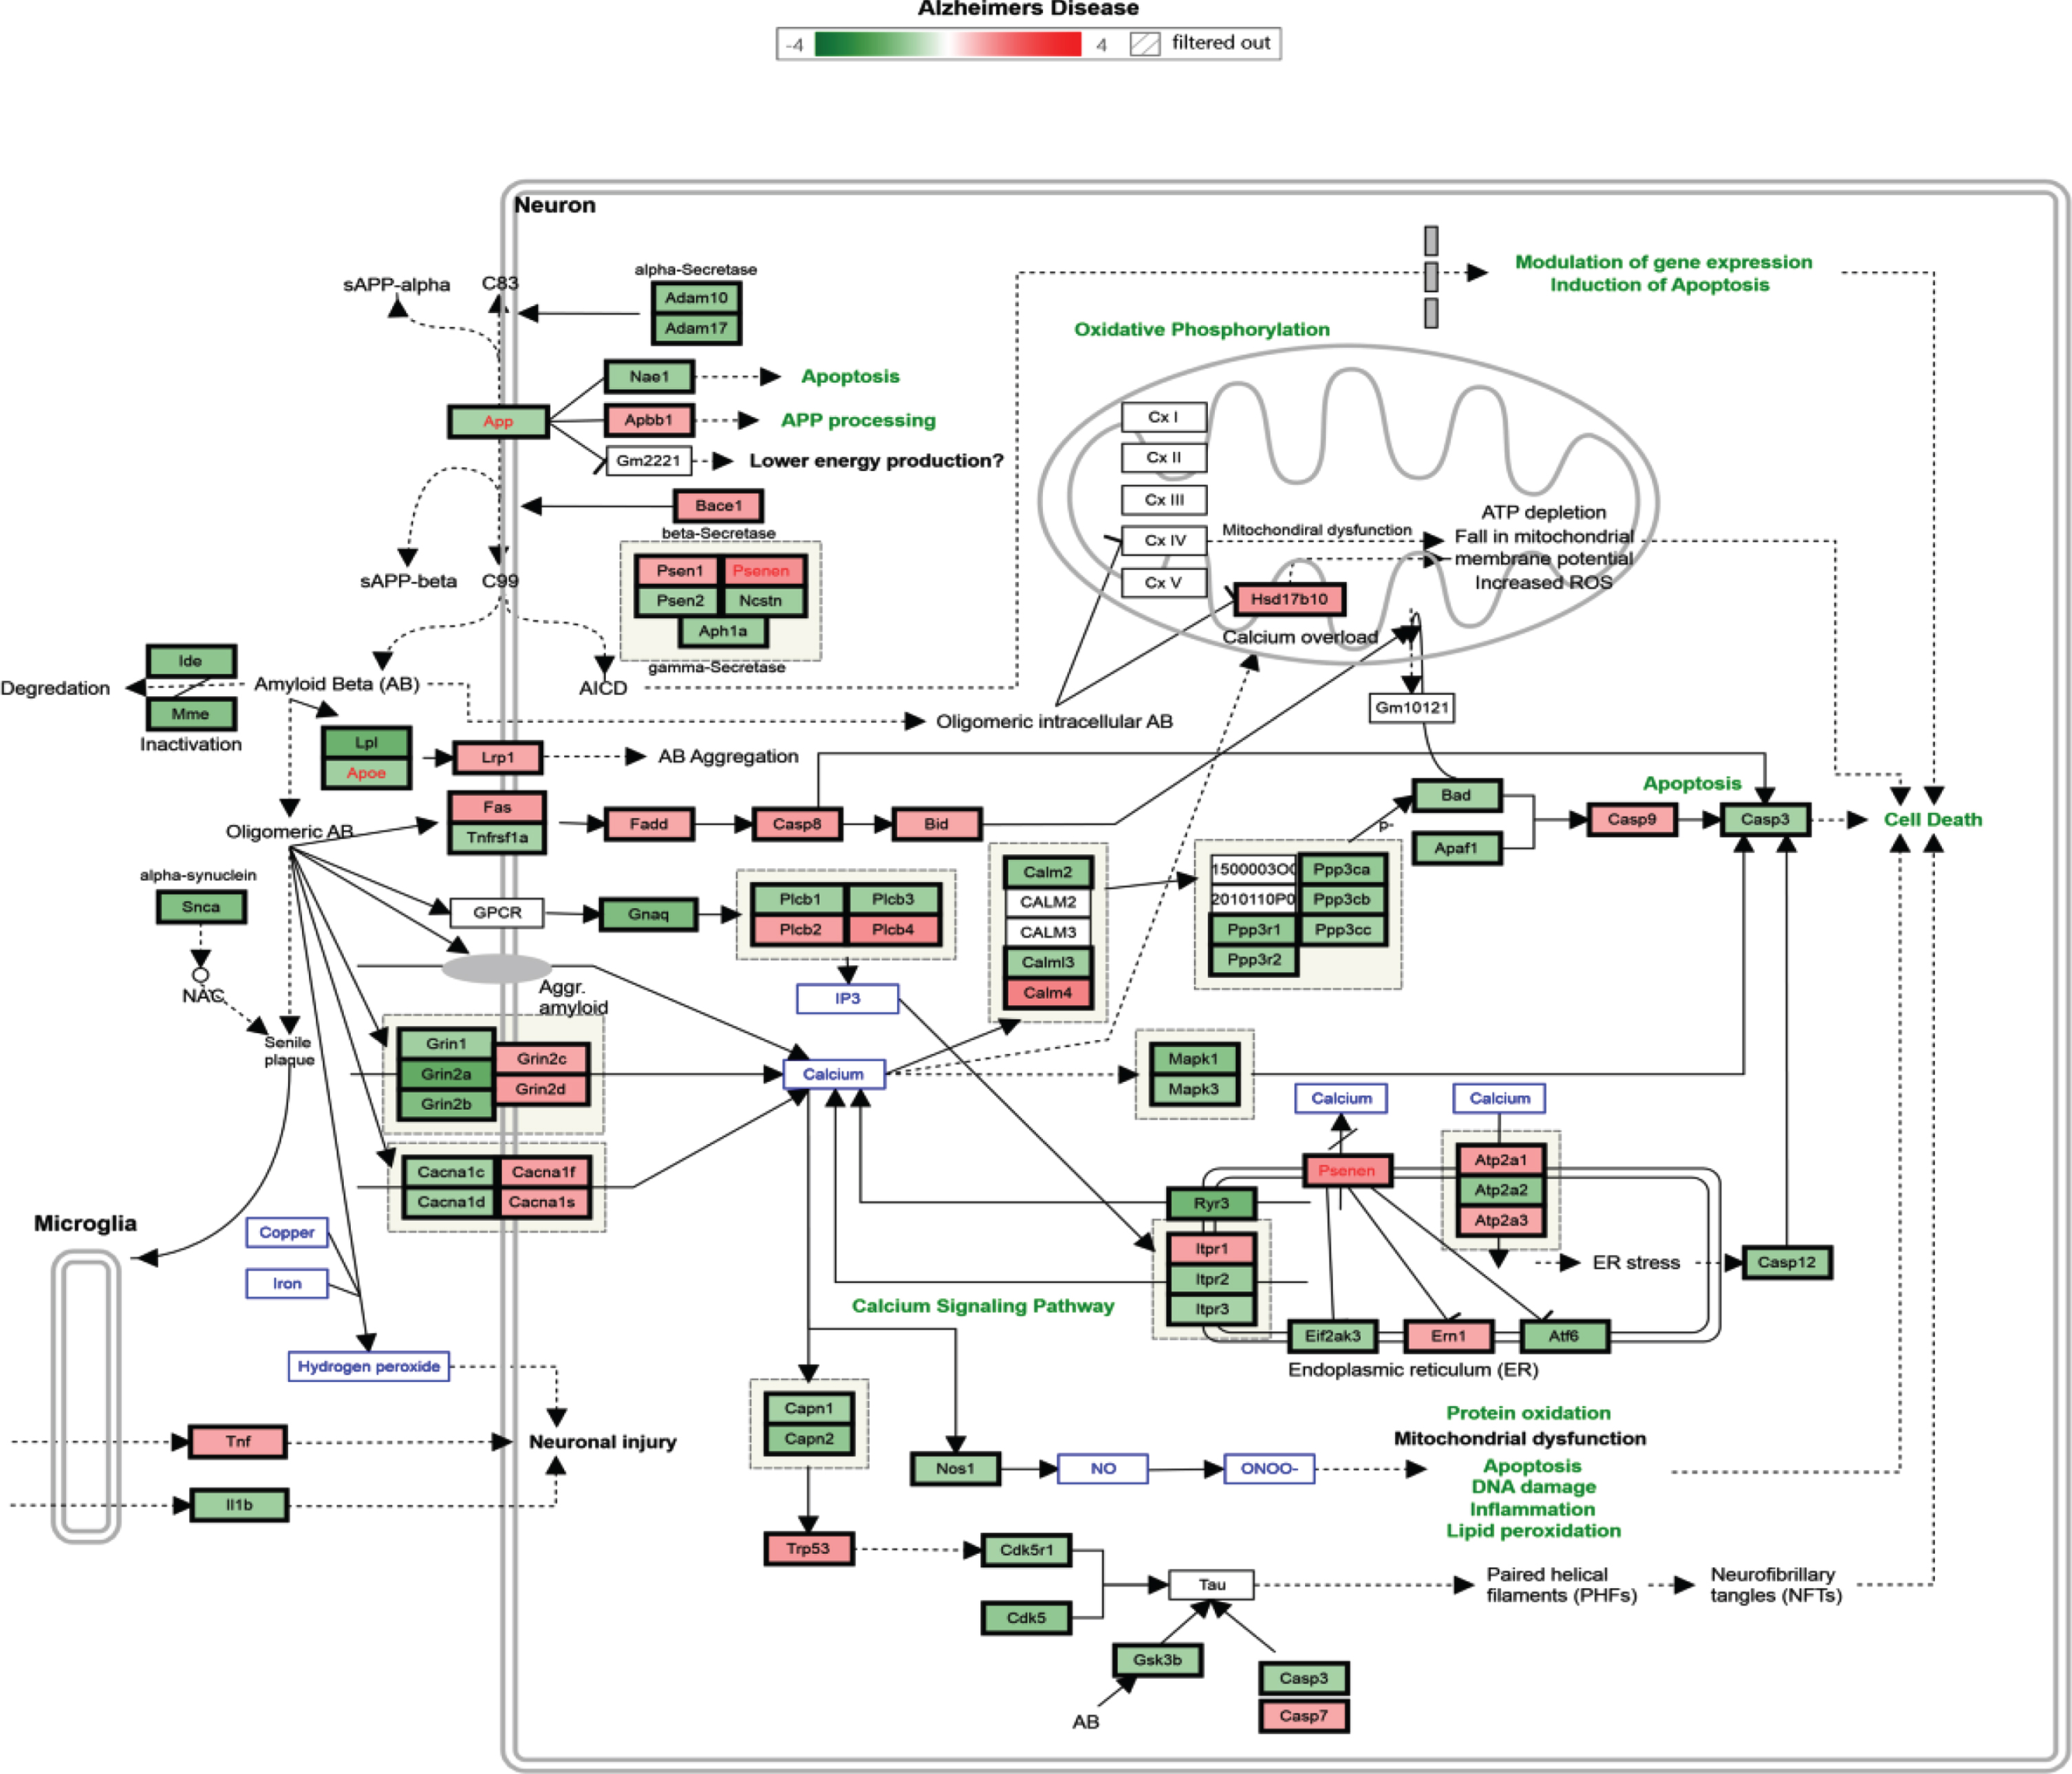 Alzheimer’s disease pathway with regulated genes after 6 months’ supplementation of TRF. *The green box indicates downregulated genes and the red box indicates upregulated genes.